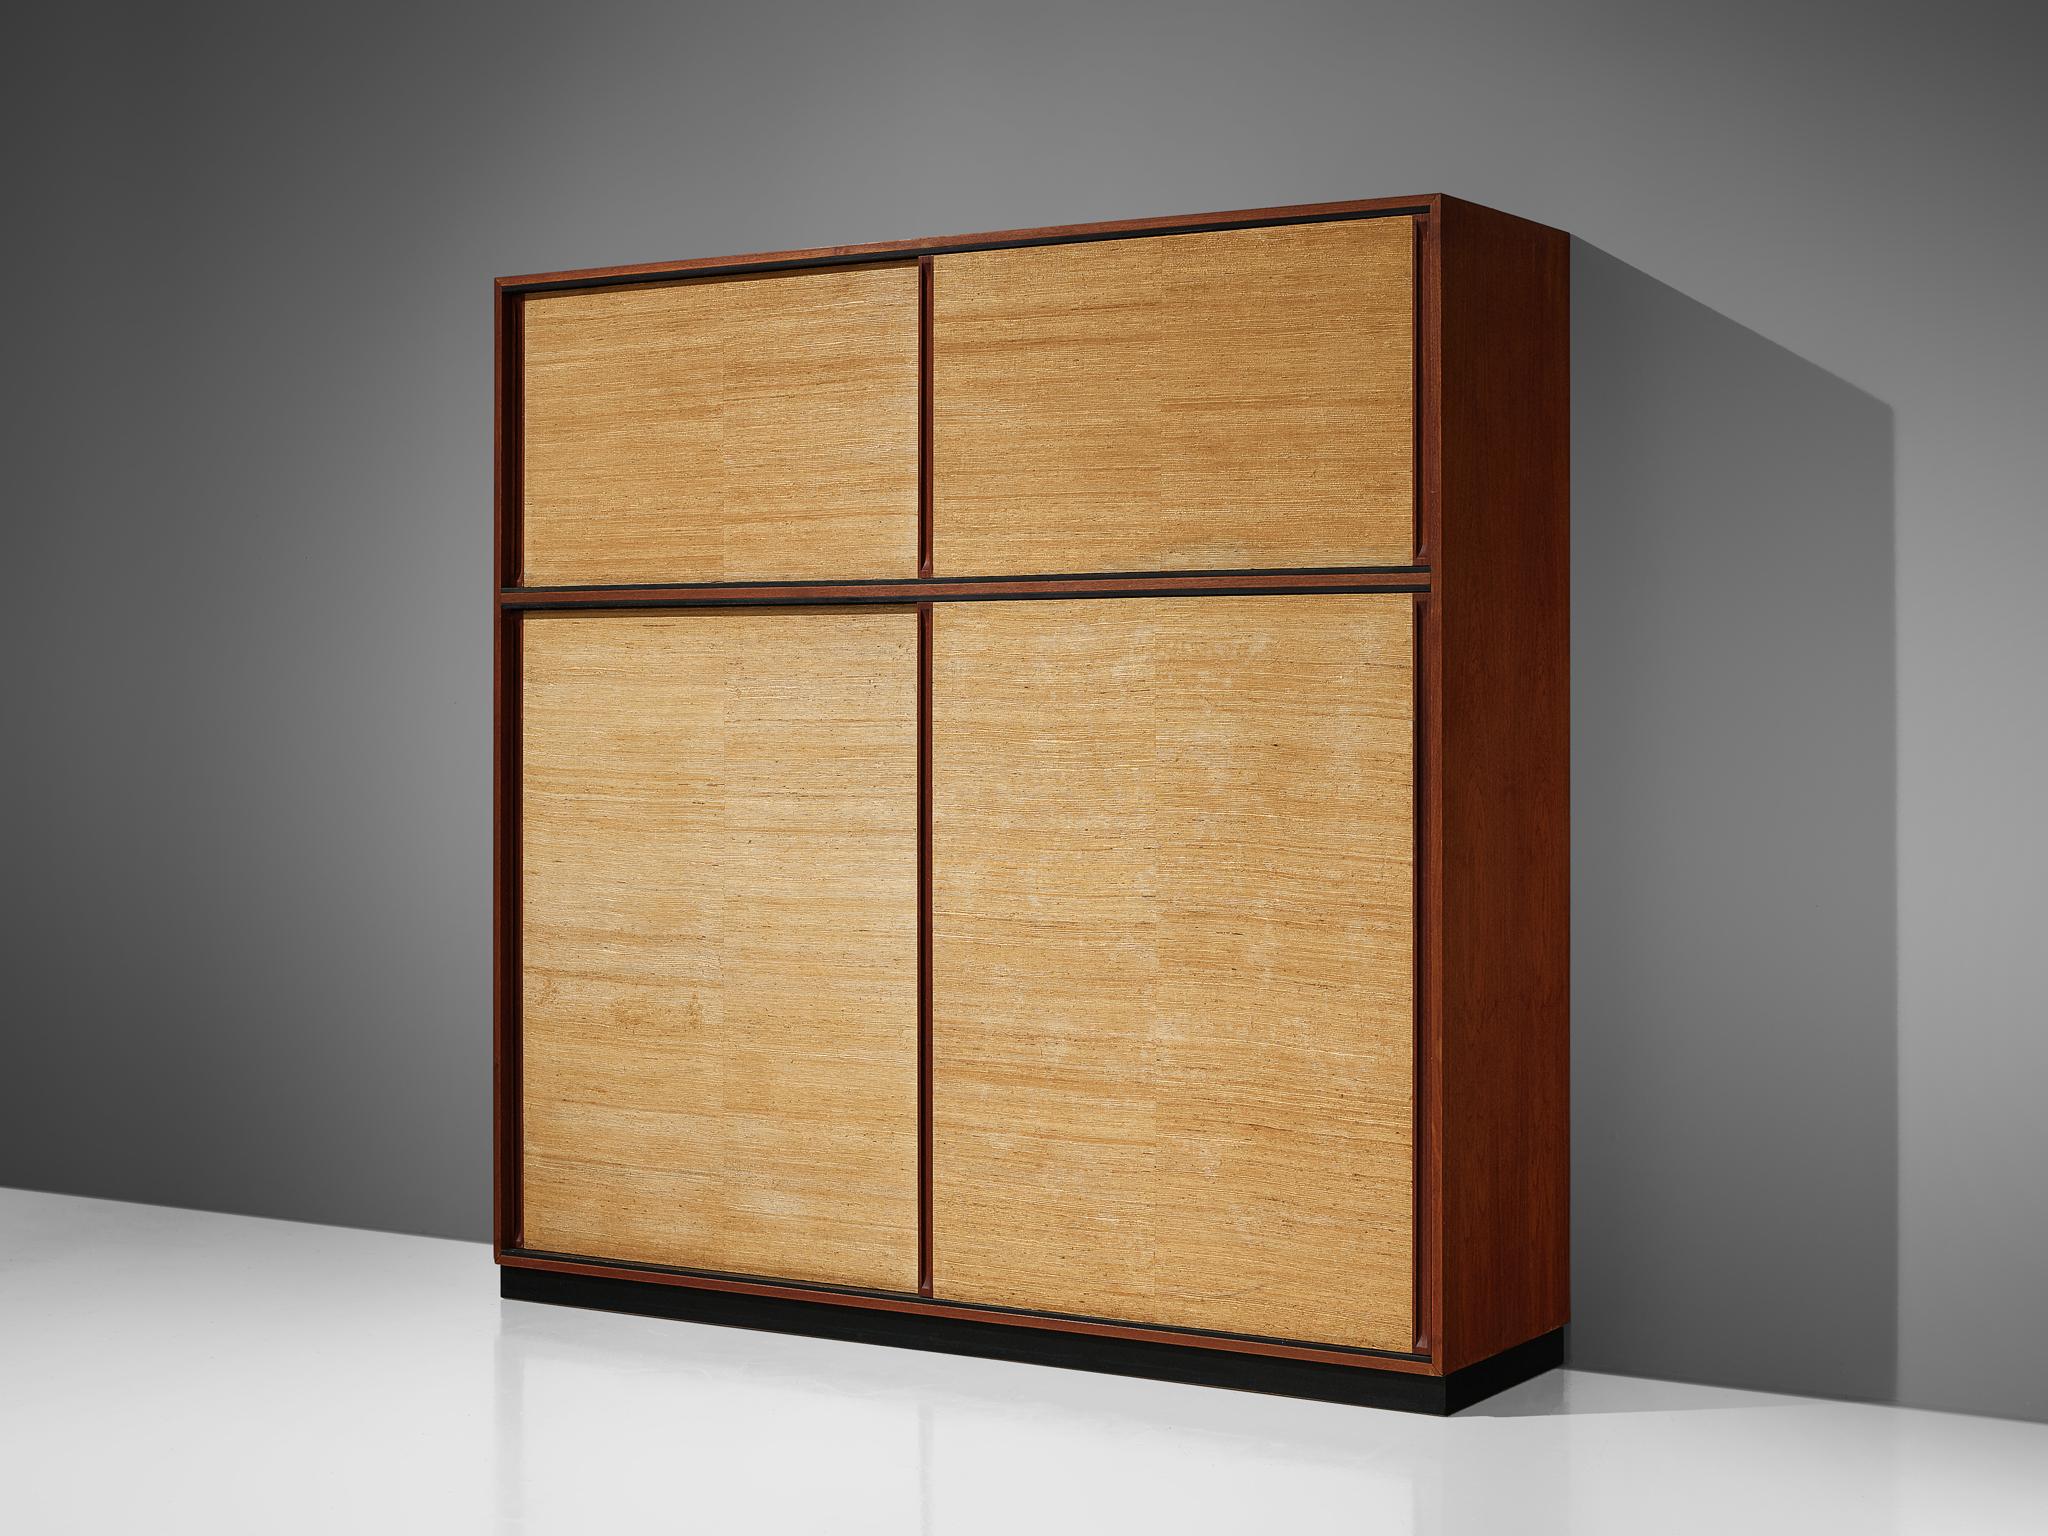 Dieter Waeckerlin for Behr Möbel, wardrobe, teak, seagrass, Germany, 1950s

This rare and stunning large cabinet or wardrobe by Dieter Waeckerlin for Behr Möbel features a body made of teak with sliding doors covered in seagrass. While being